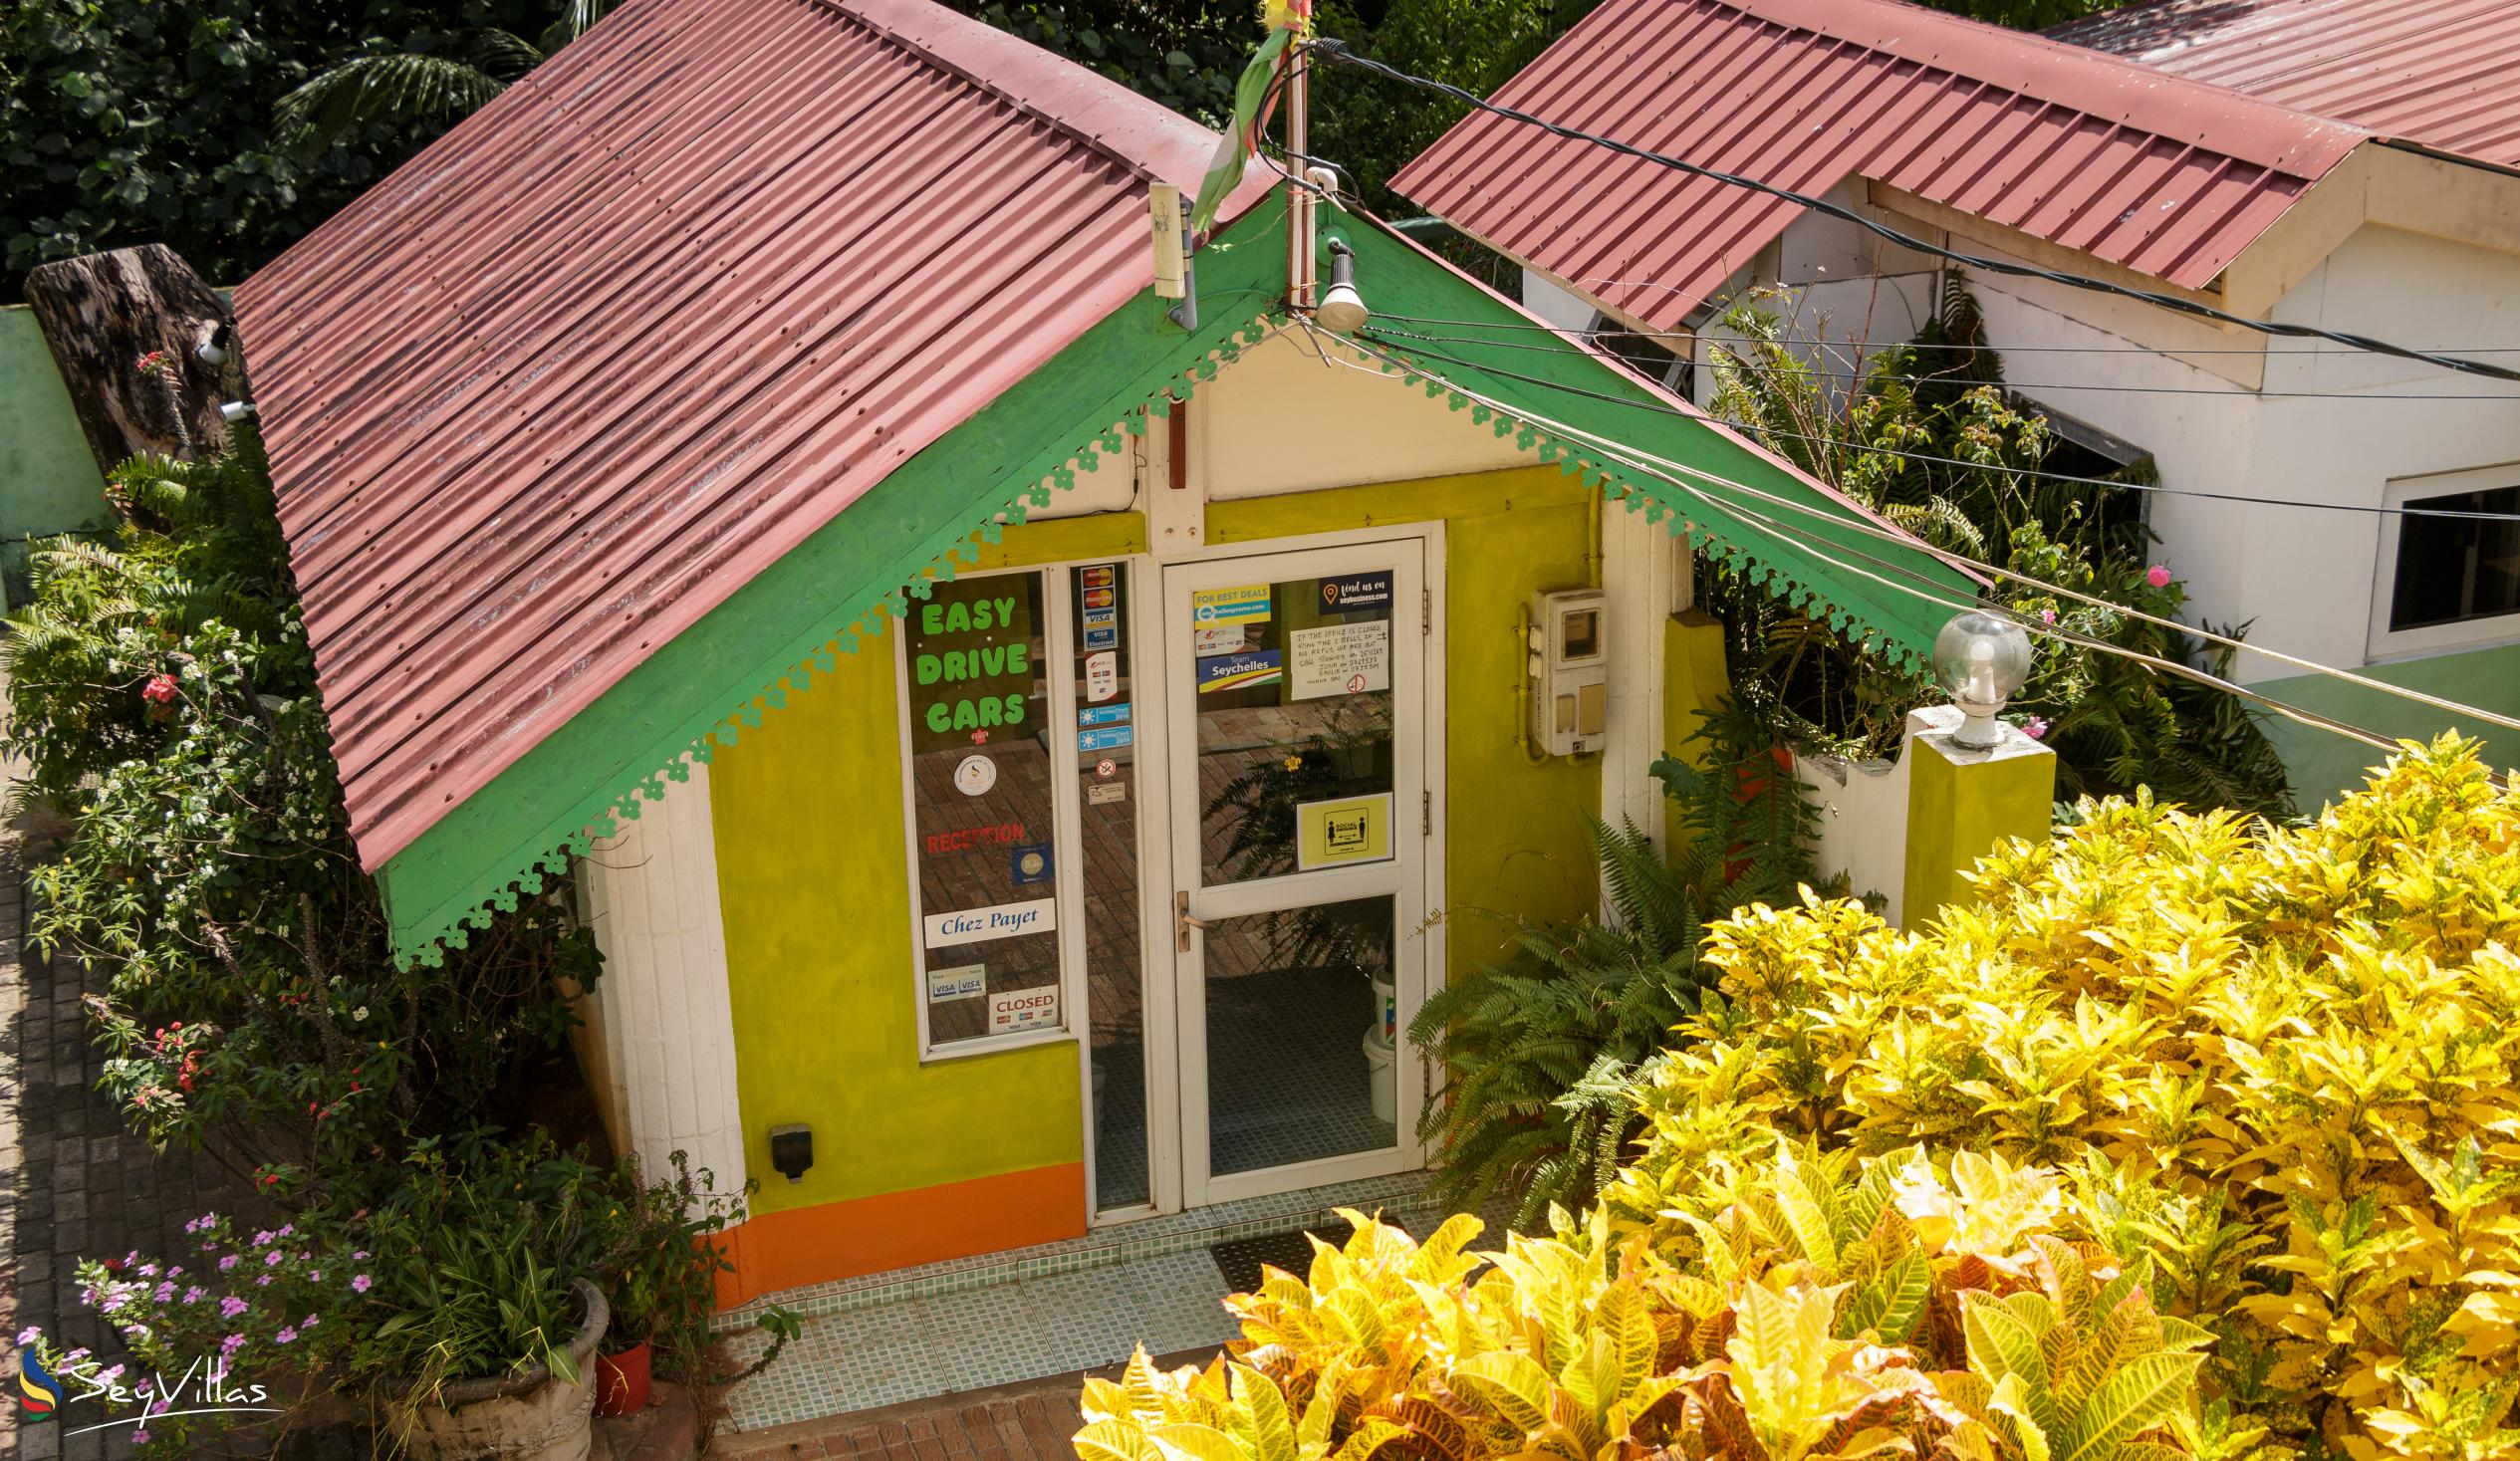 Photo 6: Chez Payet Self Catering - Outdoor area - Mahé (Seychelles)